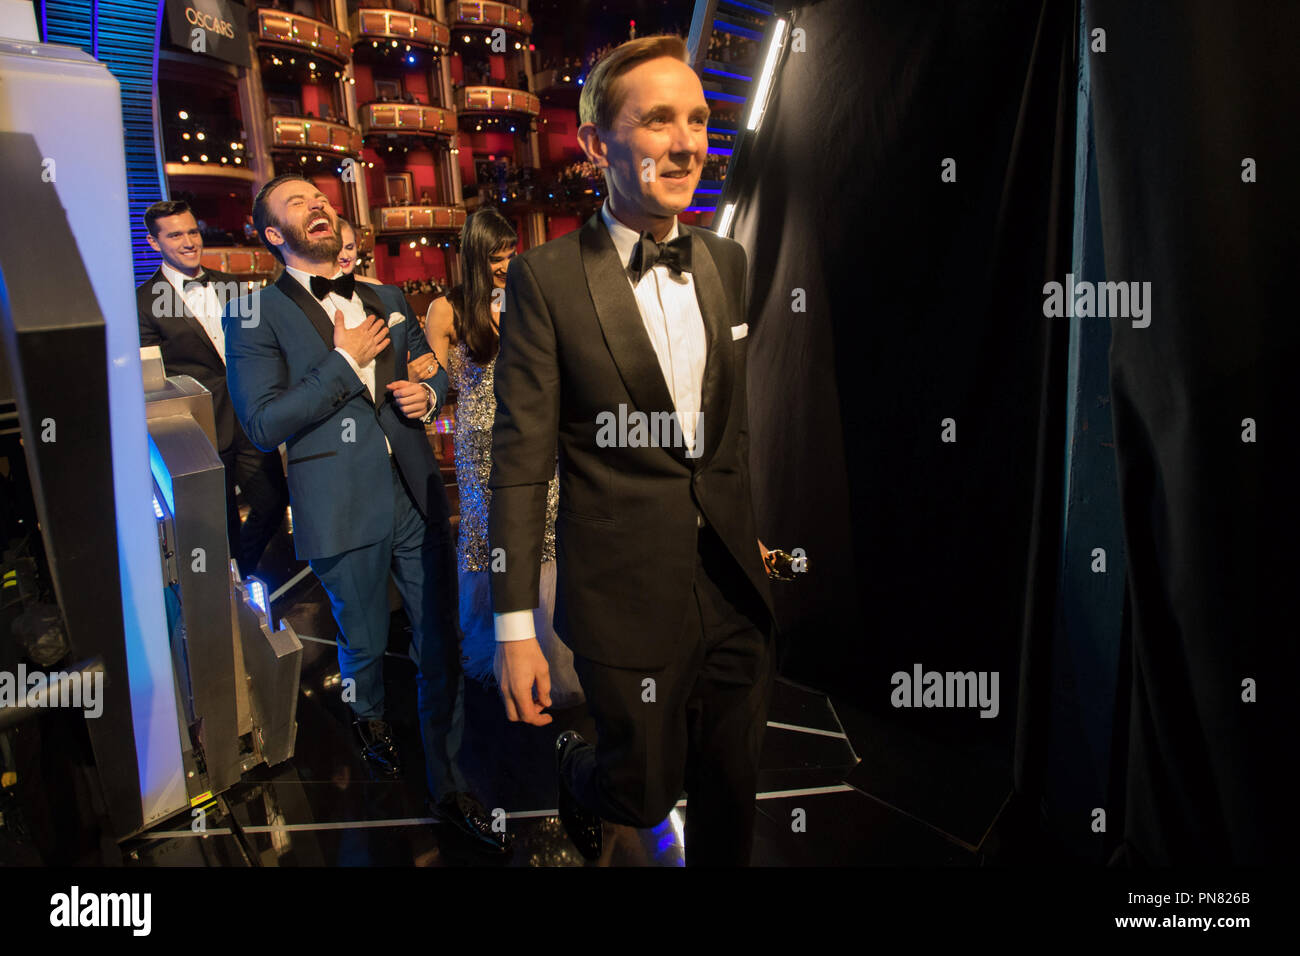 Robert Mackenzie backstage after accepting the Oscar® for Achievement in sound mixing, for work on “Hacksaw Ridge” during the live ABC Telecast of The 89th Oscars® at the Dolby® Theatre in Hollywood, CA on Sunday, February 26, 2017.  File Reference # 33242 600THA  For Editorial Use Only -  All Rights Reserved Stock Photo